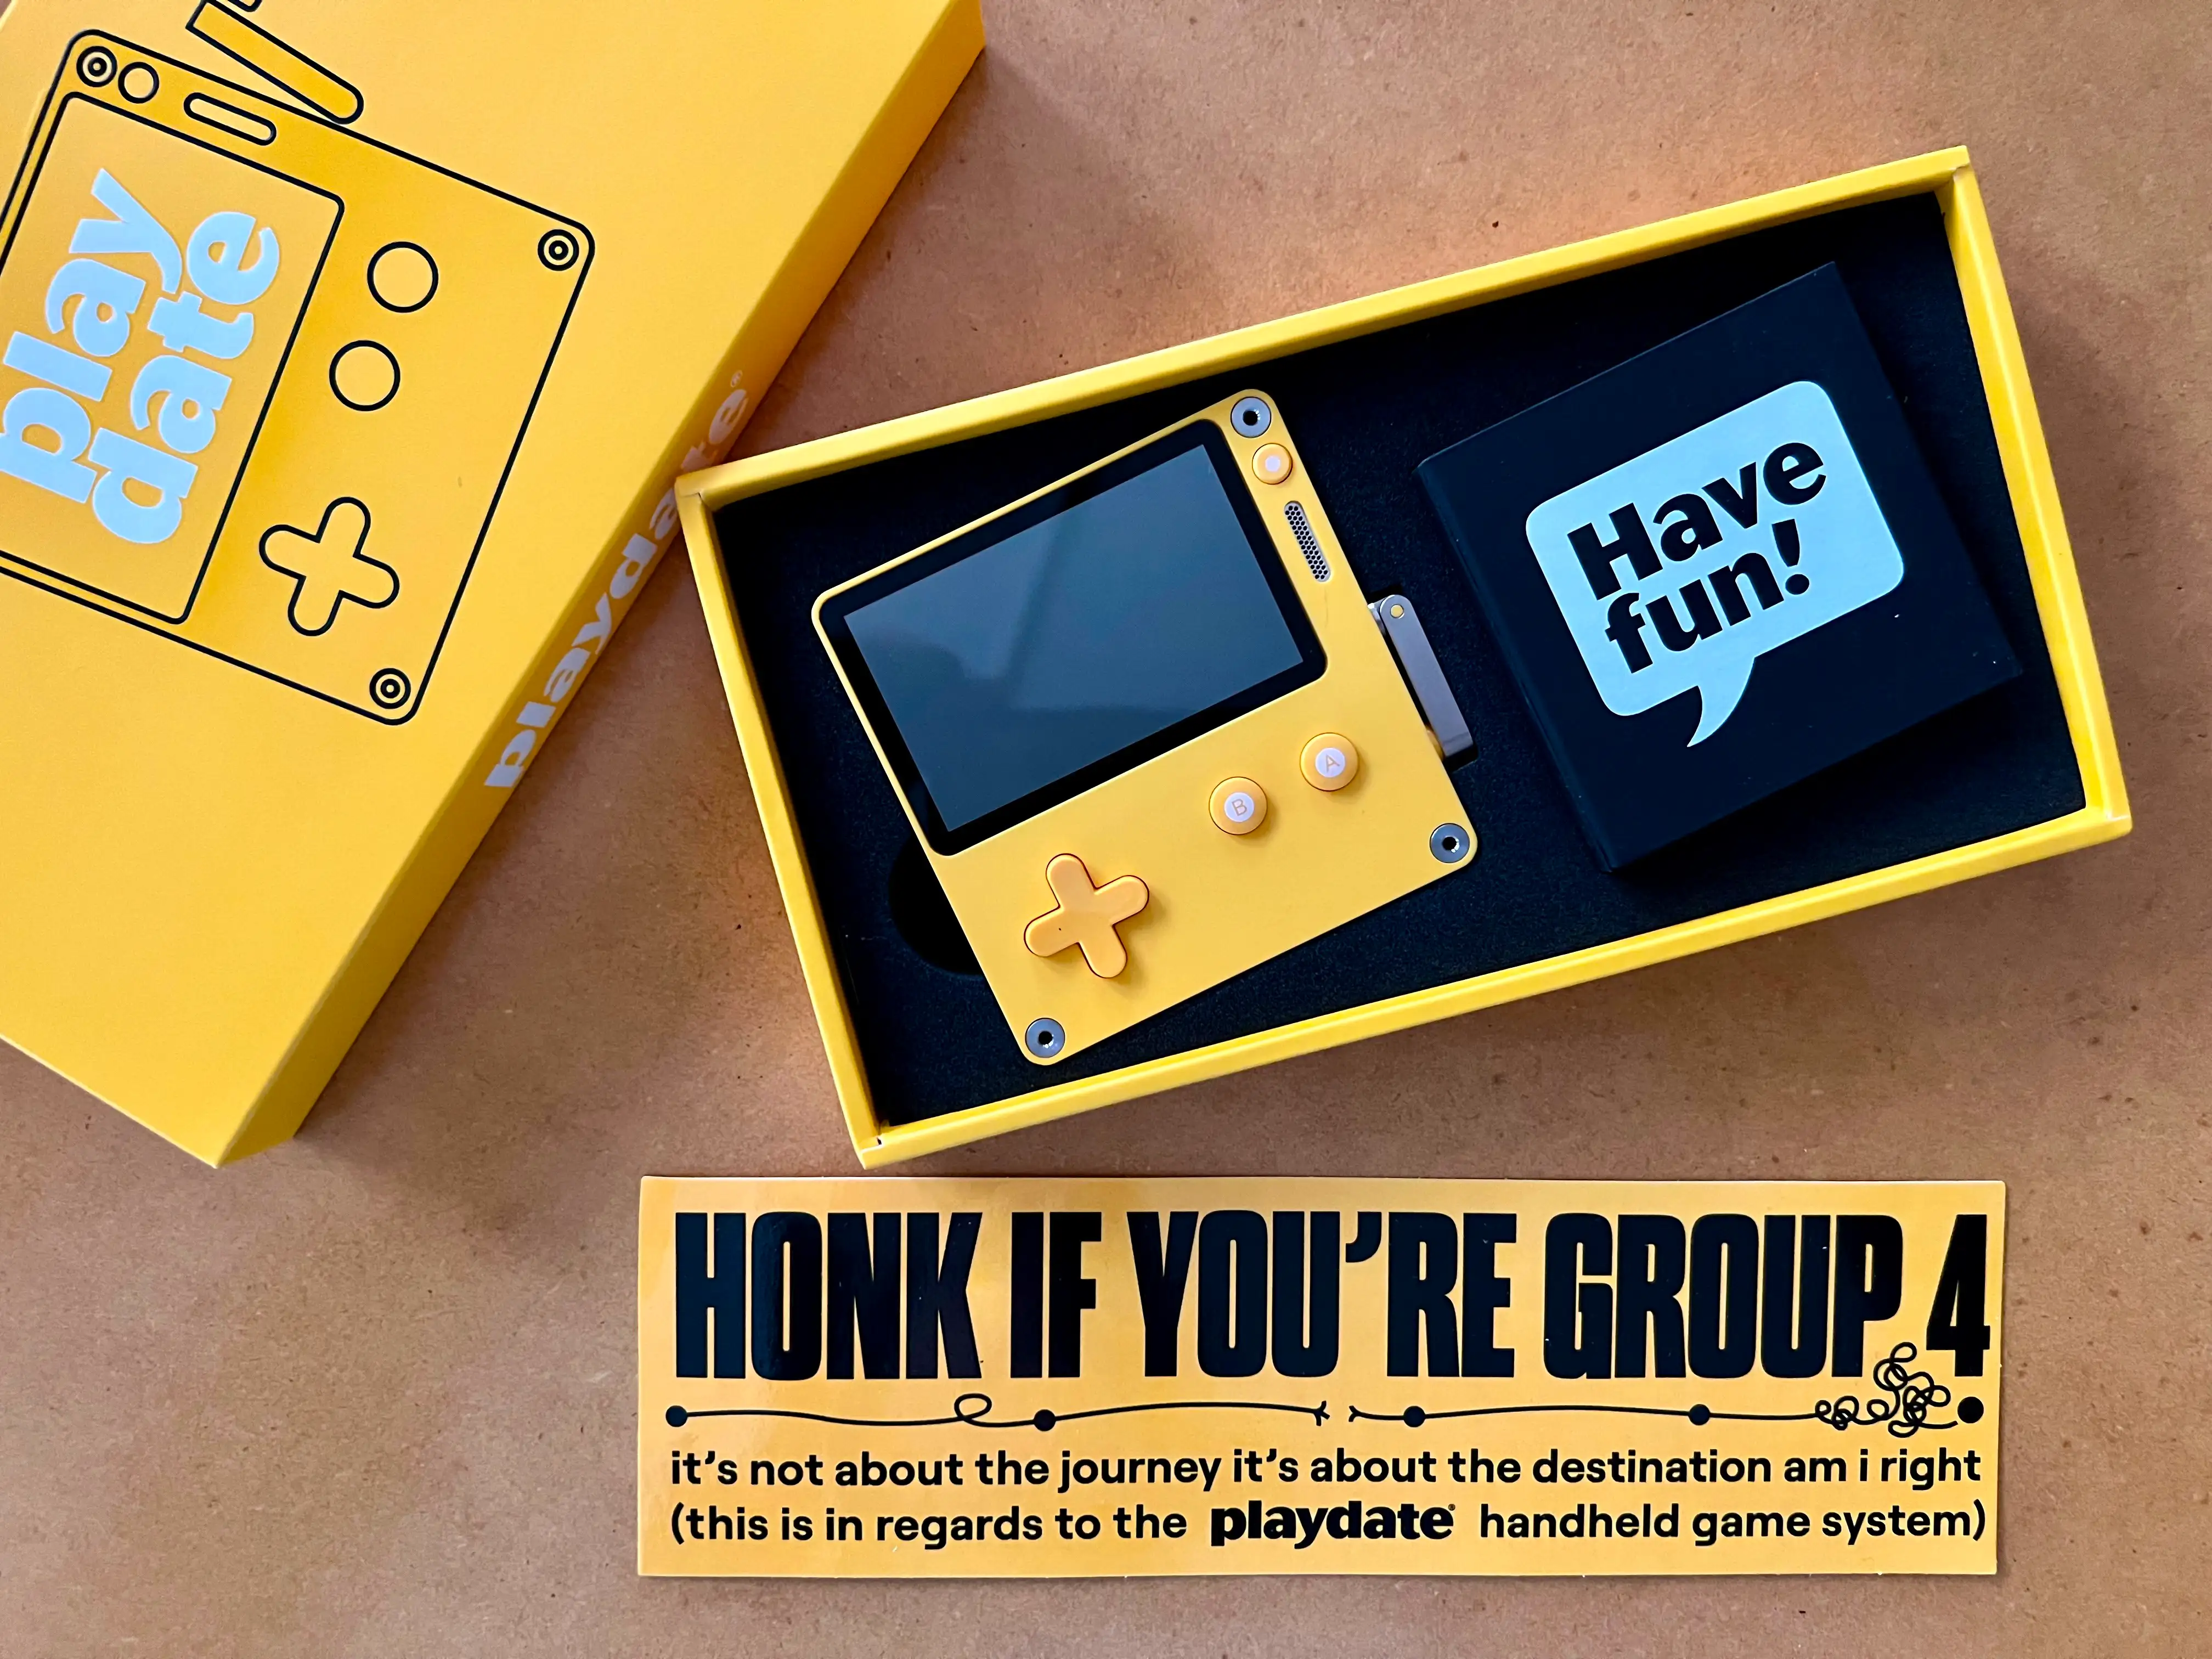 The Playdte in its yellow box with the bumper sticker “Honk if you are in Group 4“